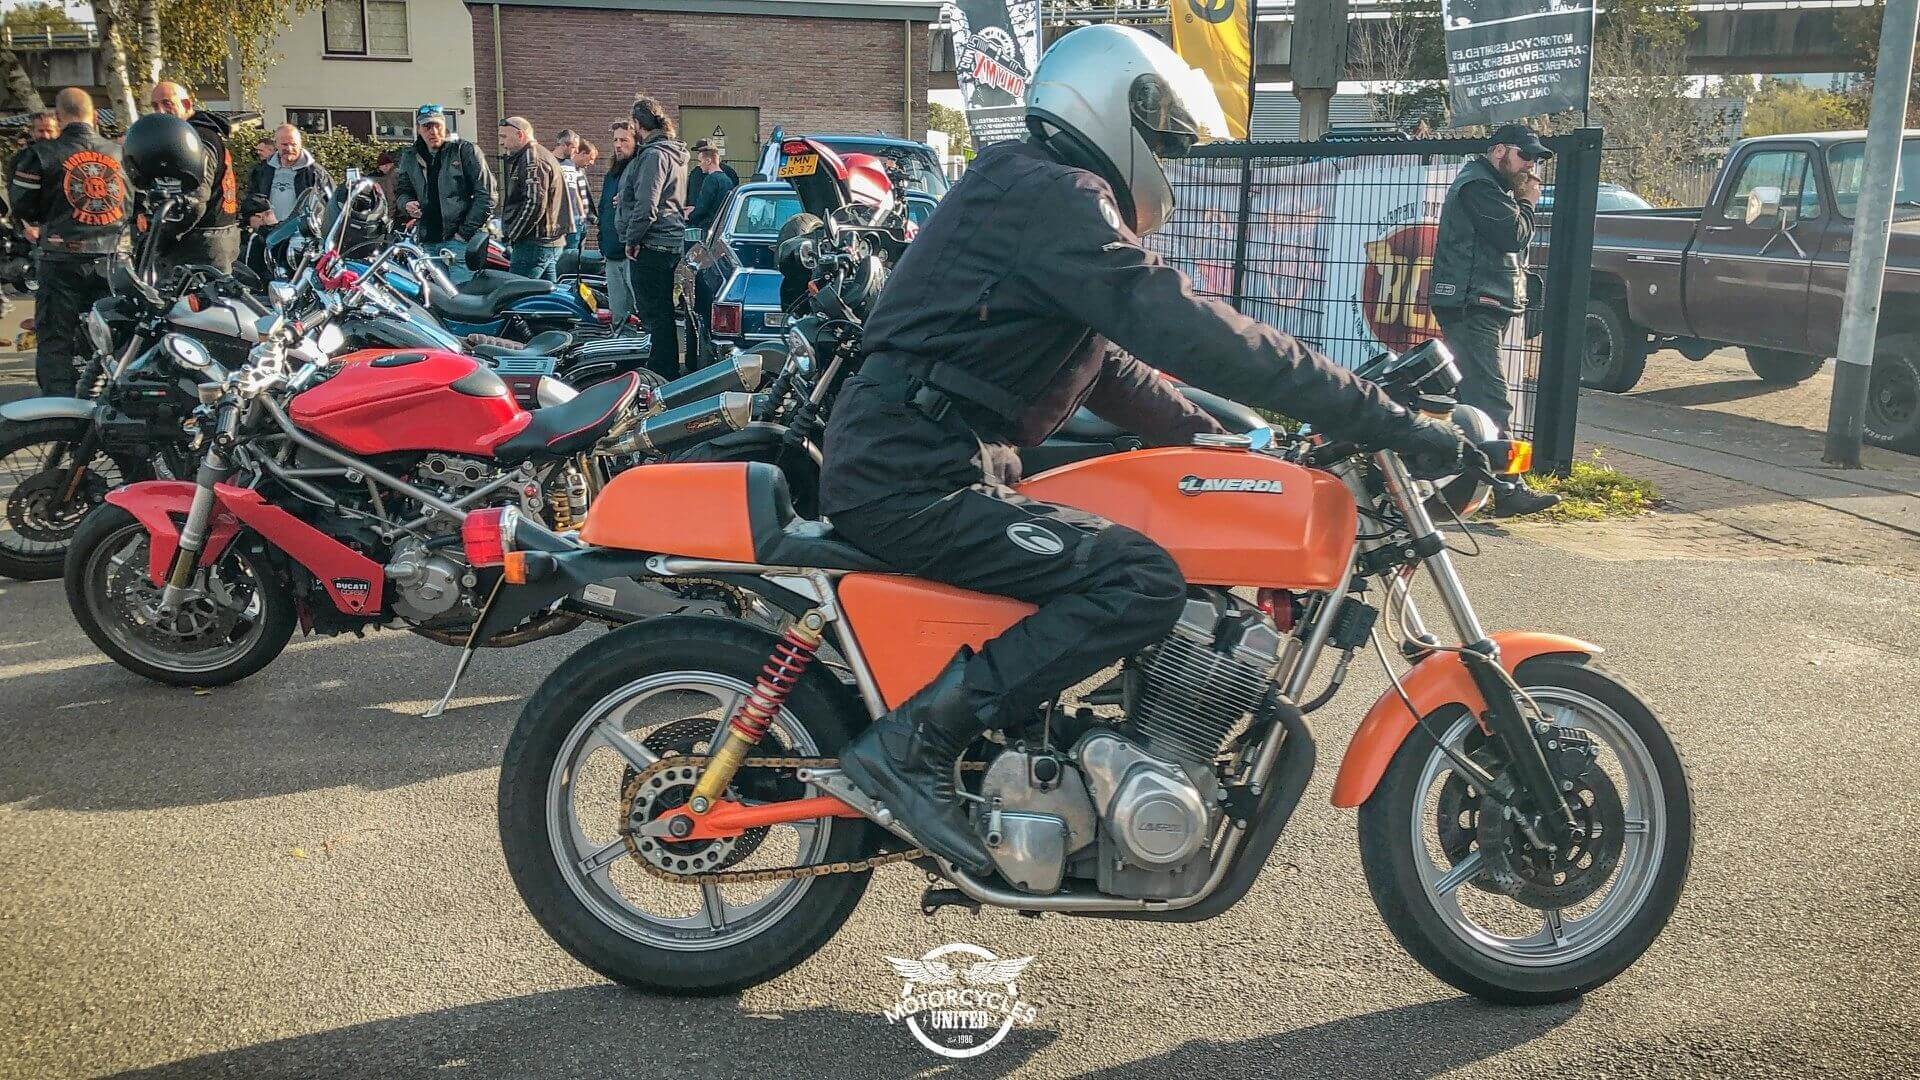 Motorcycles United Event Blog 2019